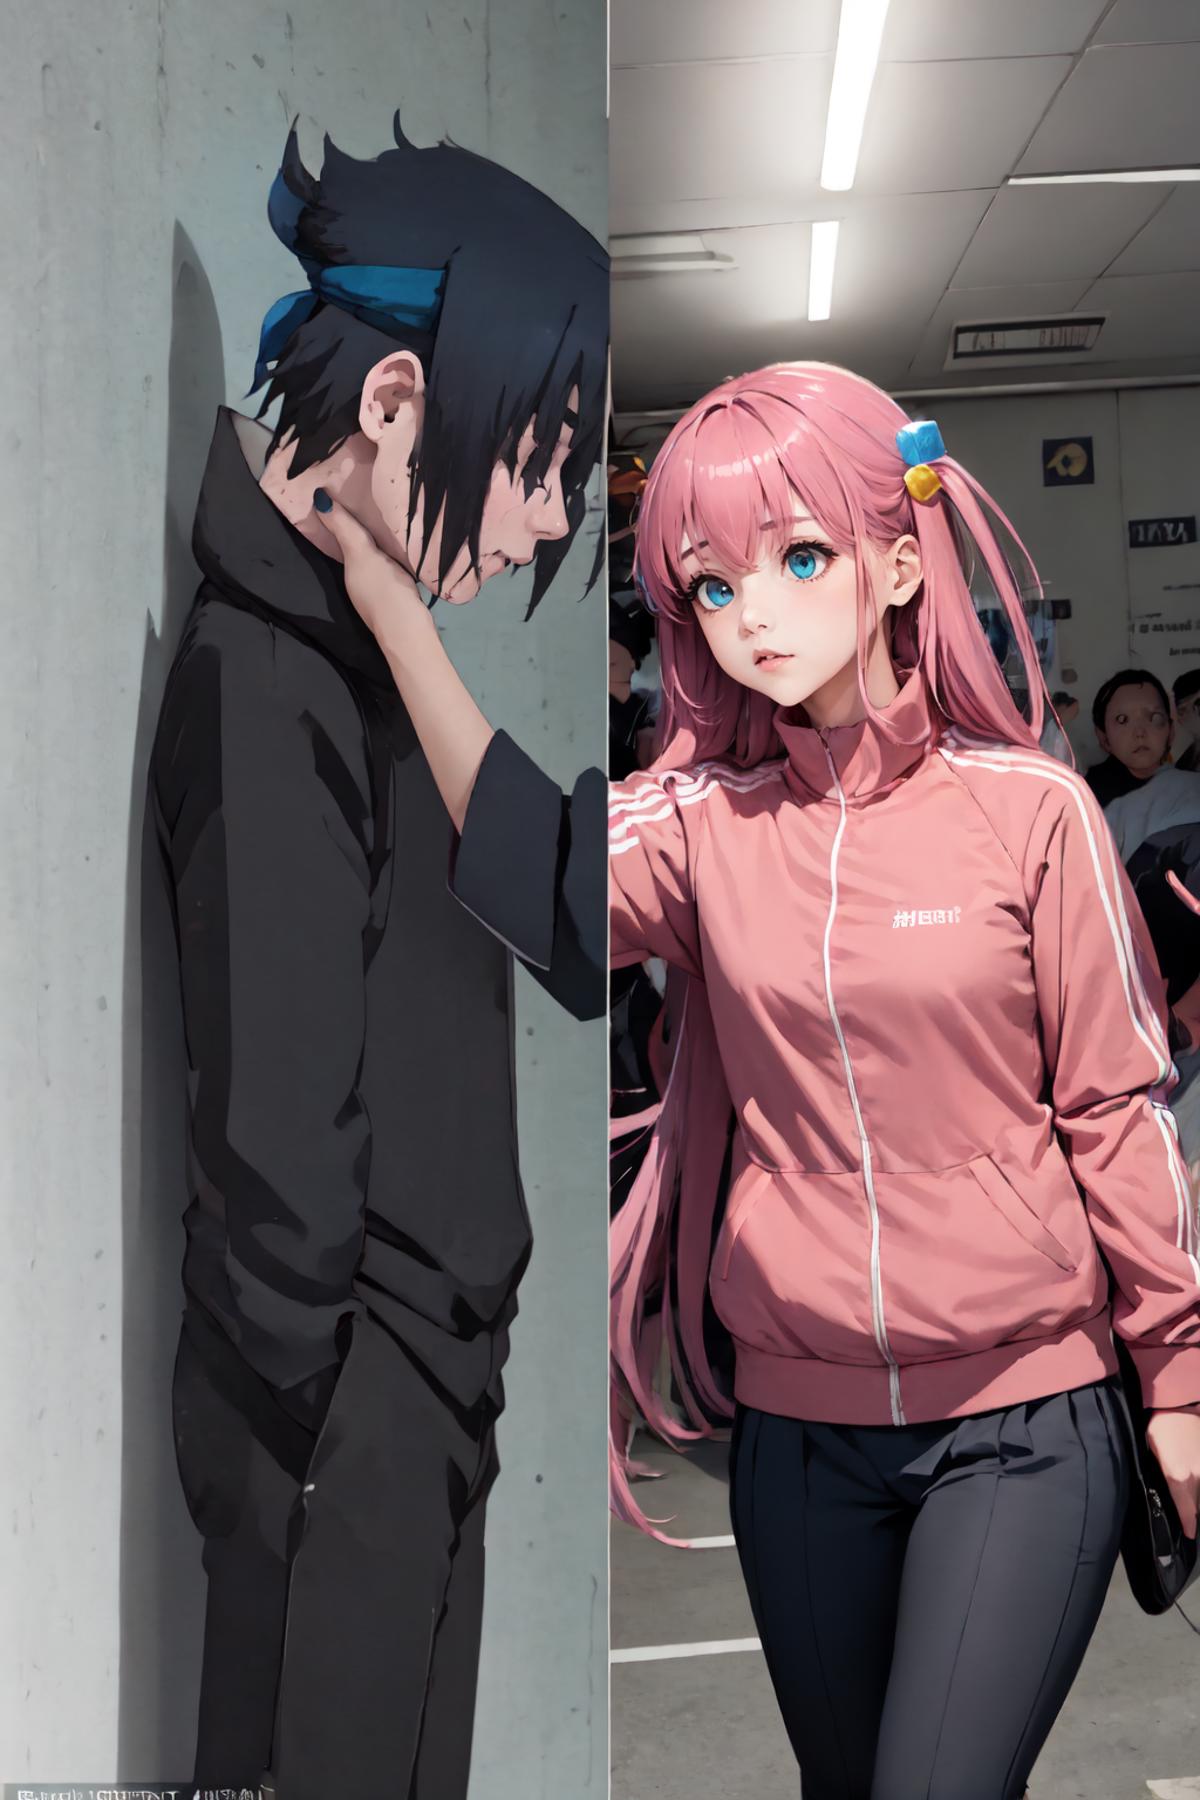 Anime drawing of a girl and a boy with pink hair.